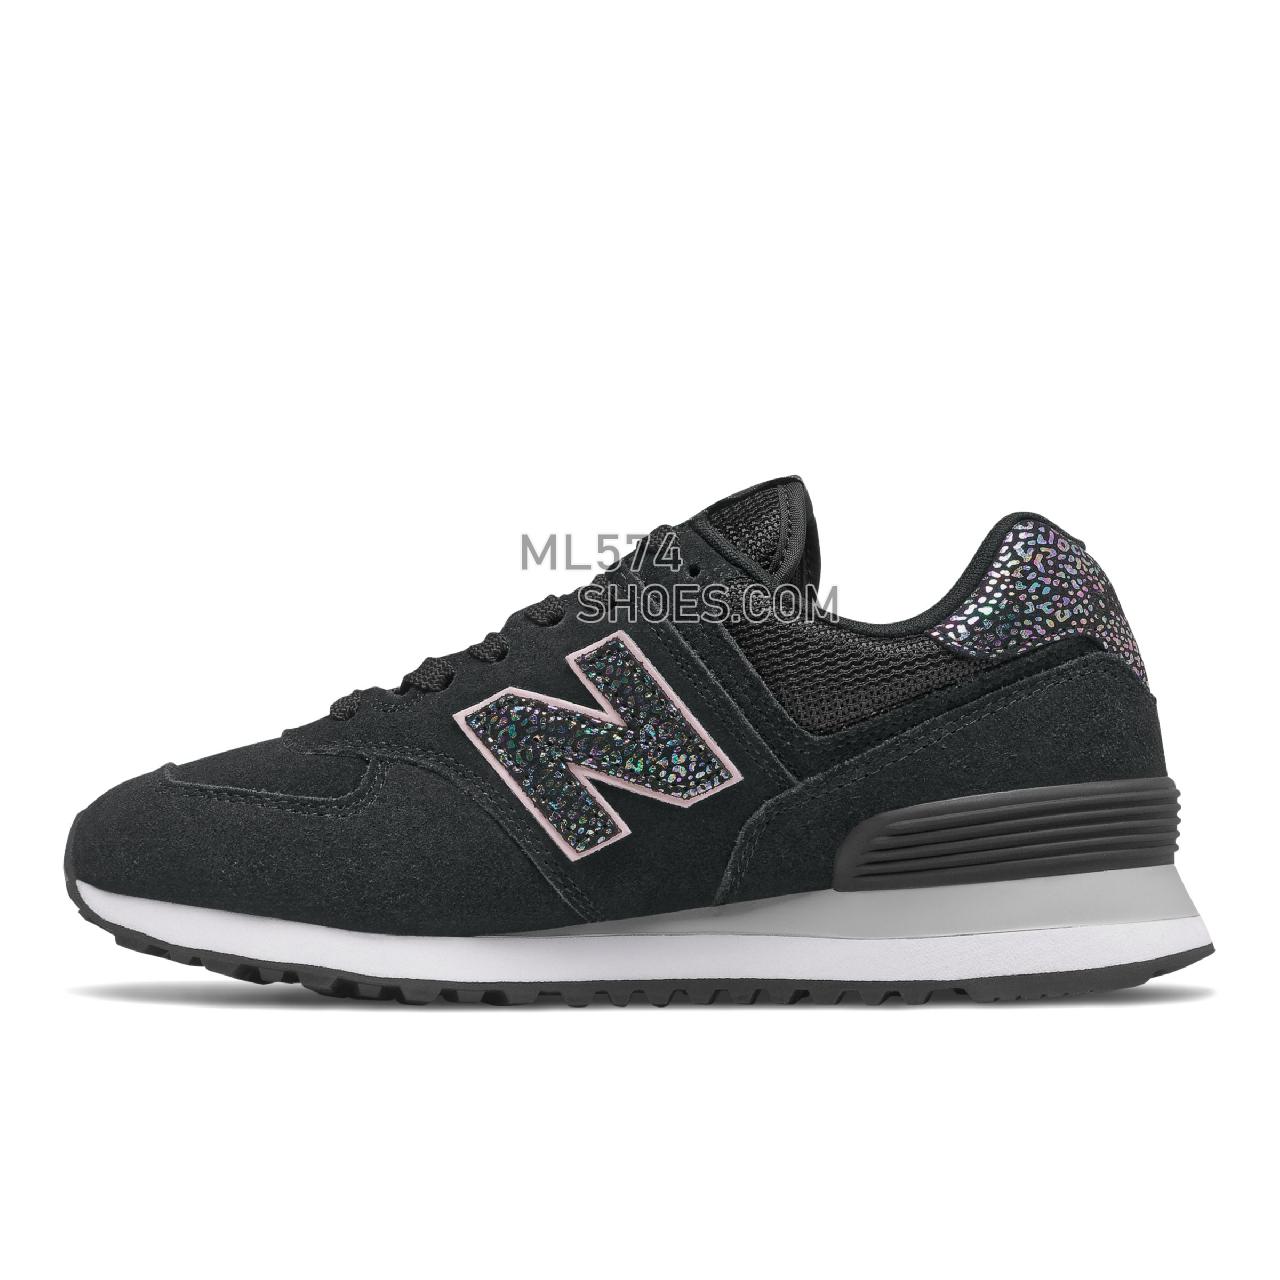 New Balance 574 - Women's Classic Sneakers - Black with White - WL574AN2